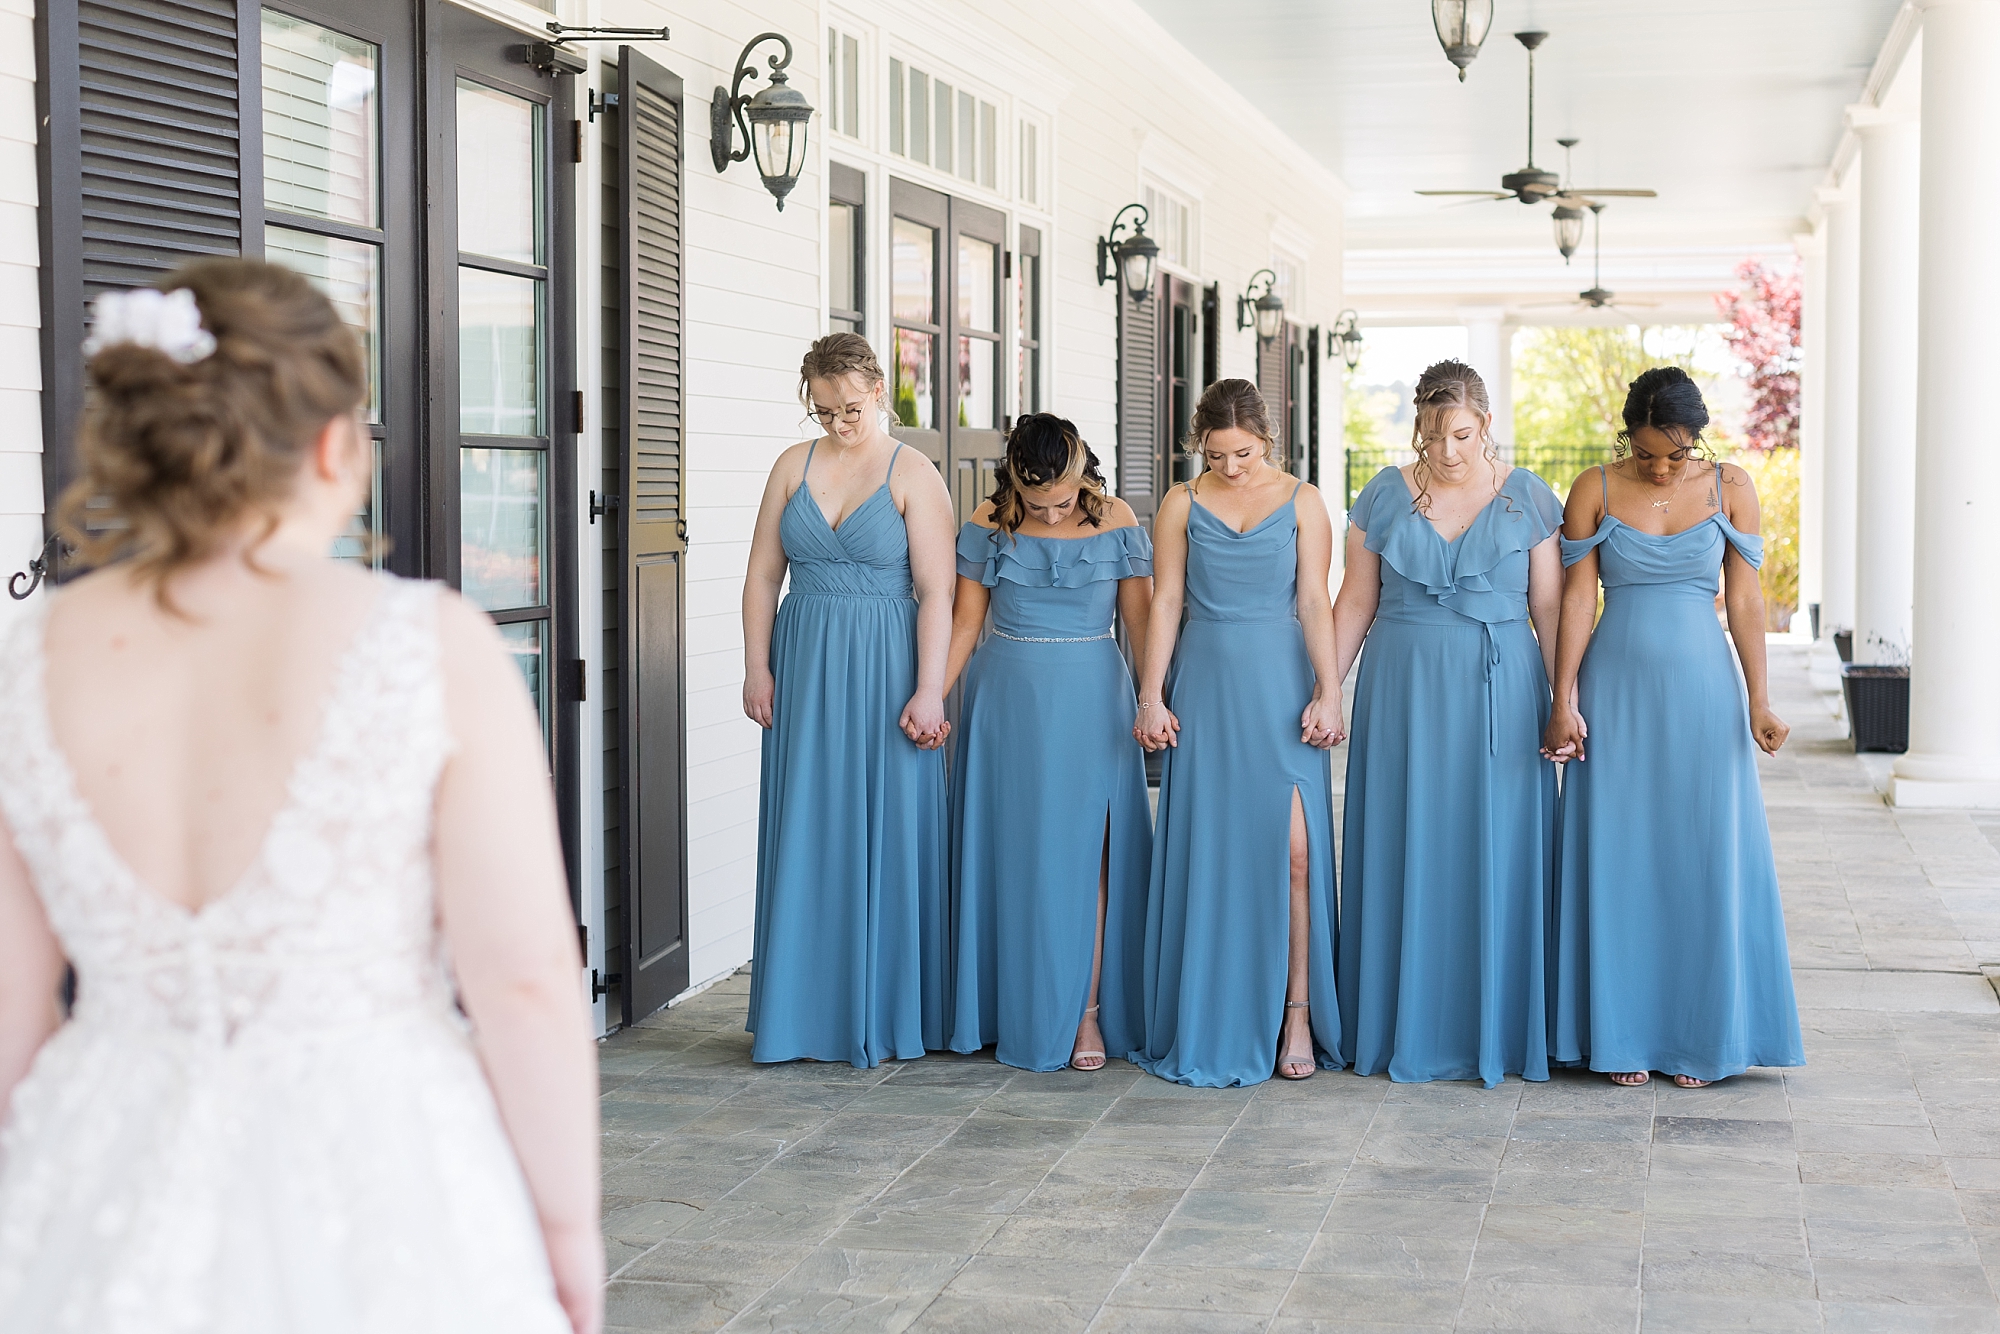 Bridesmaids about to see bride for the first time - Raleigh NC Wedding Photographer - Sarah Hinckley Photography